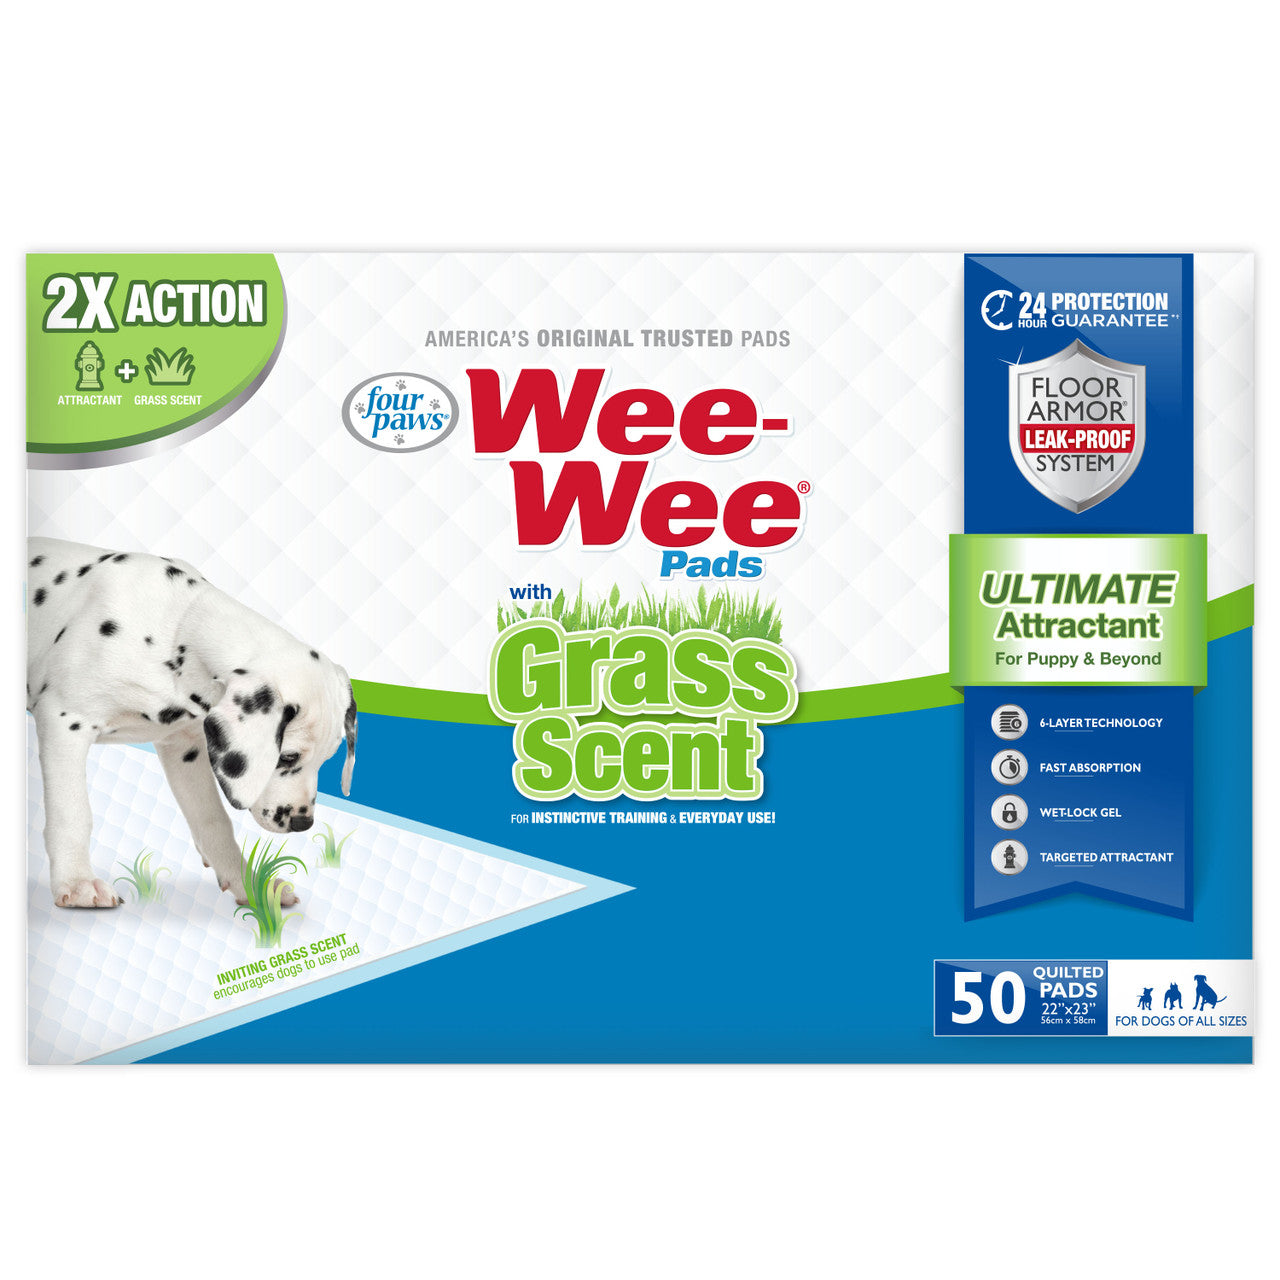 Four Paws Four Paws Wee-Wee Ultimate Attractant Dog Pee Pads with Grass Scent Grass Scented 50 Count